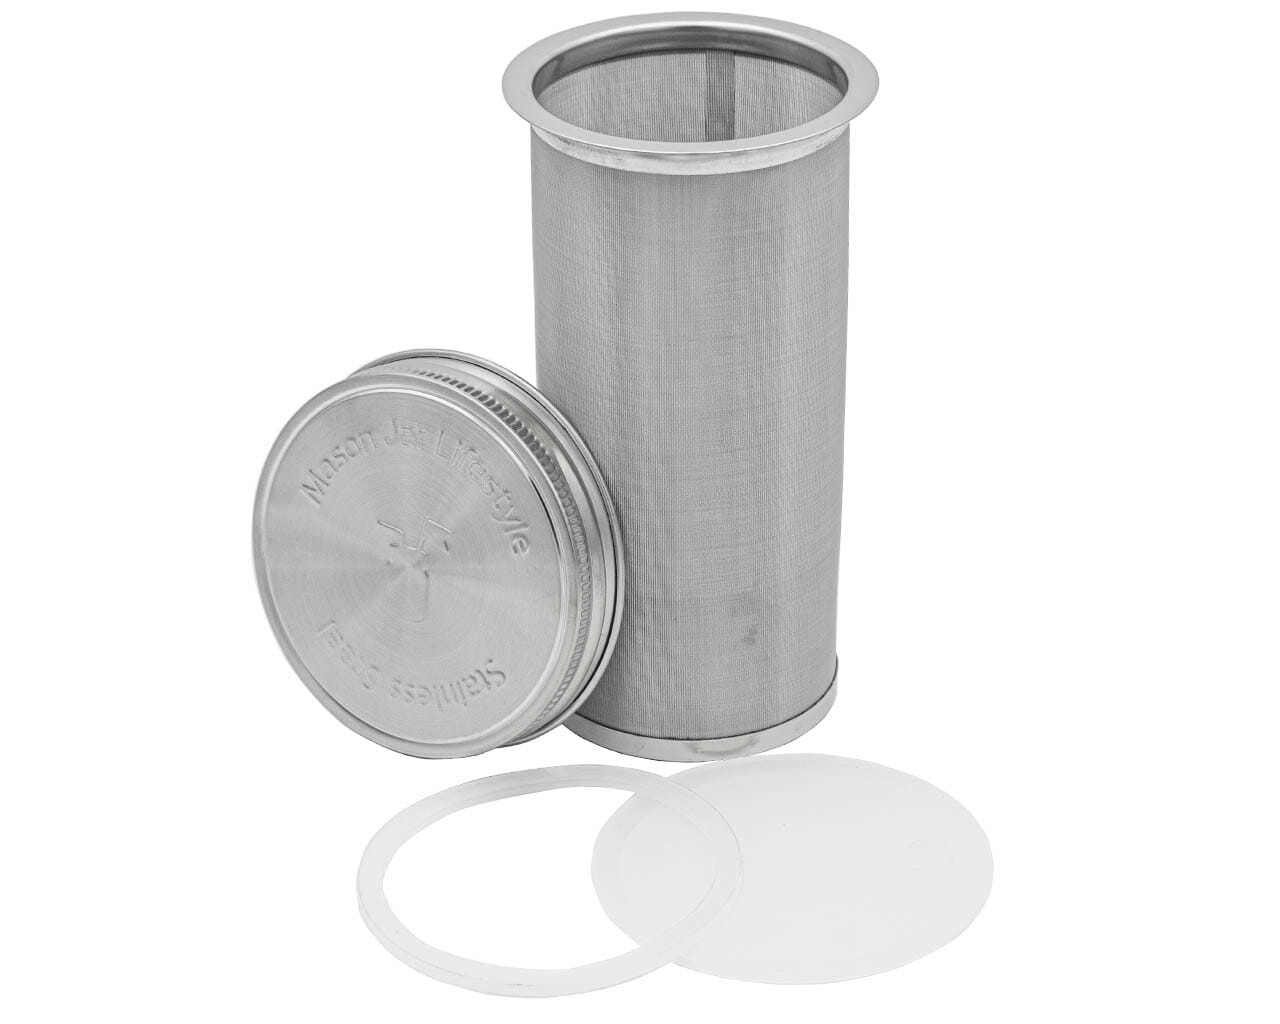 https://masonjarlifestyle.com/cdn/shop/files/mason-jar-lifestyle-quart-32oz-cold-brew-coffee-tea-filter-maker-wide-mouth-stainless-steel-lid-silicone-sealing-ring-liner.jpg?v=1695766411&width=1280